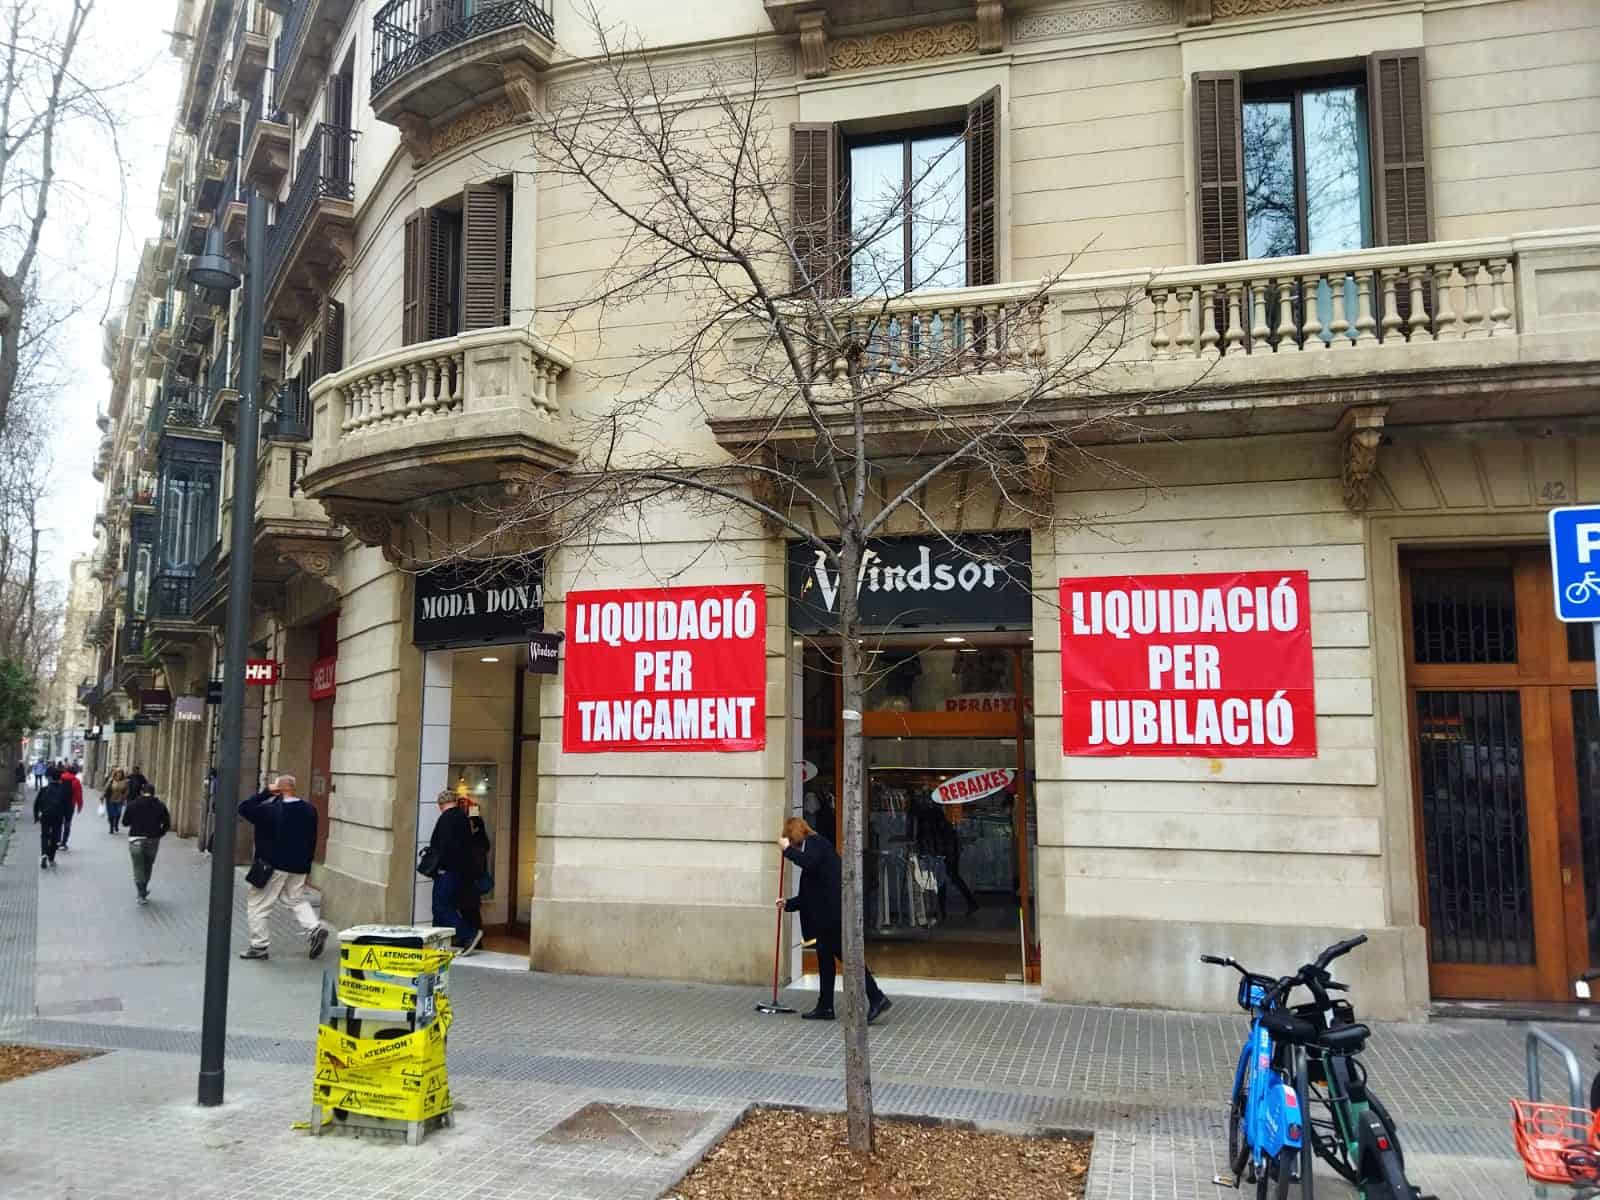 The end of an era: closure of Windsor clothing store in Barcelona